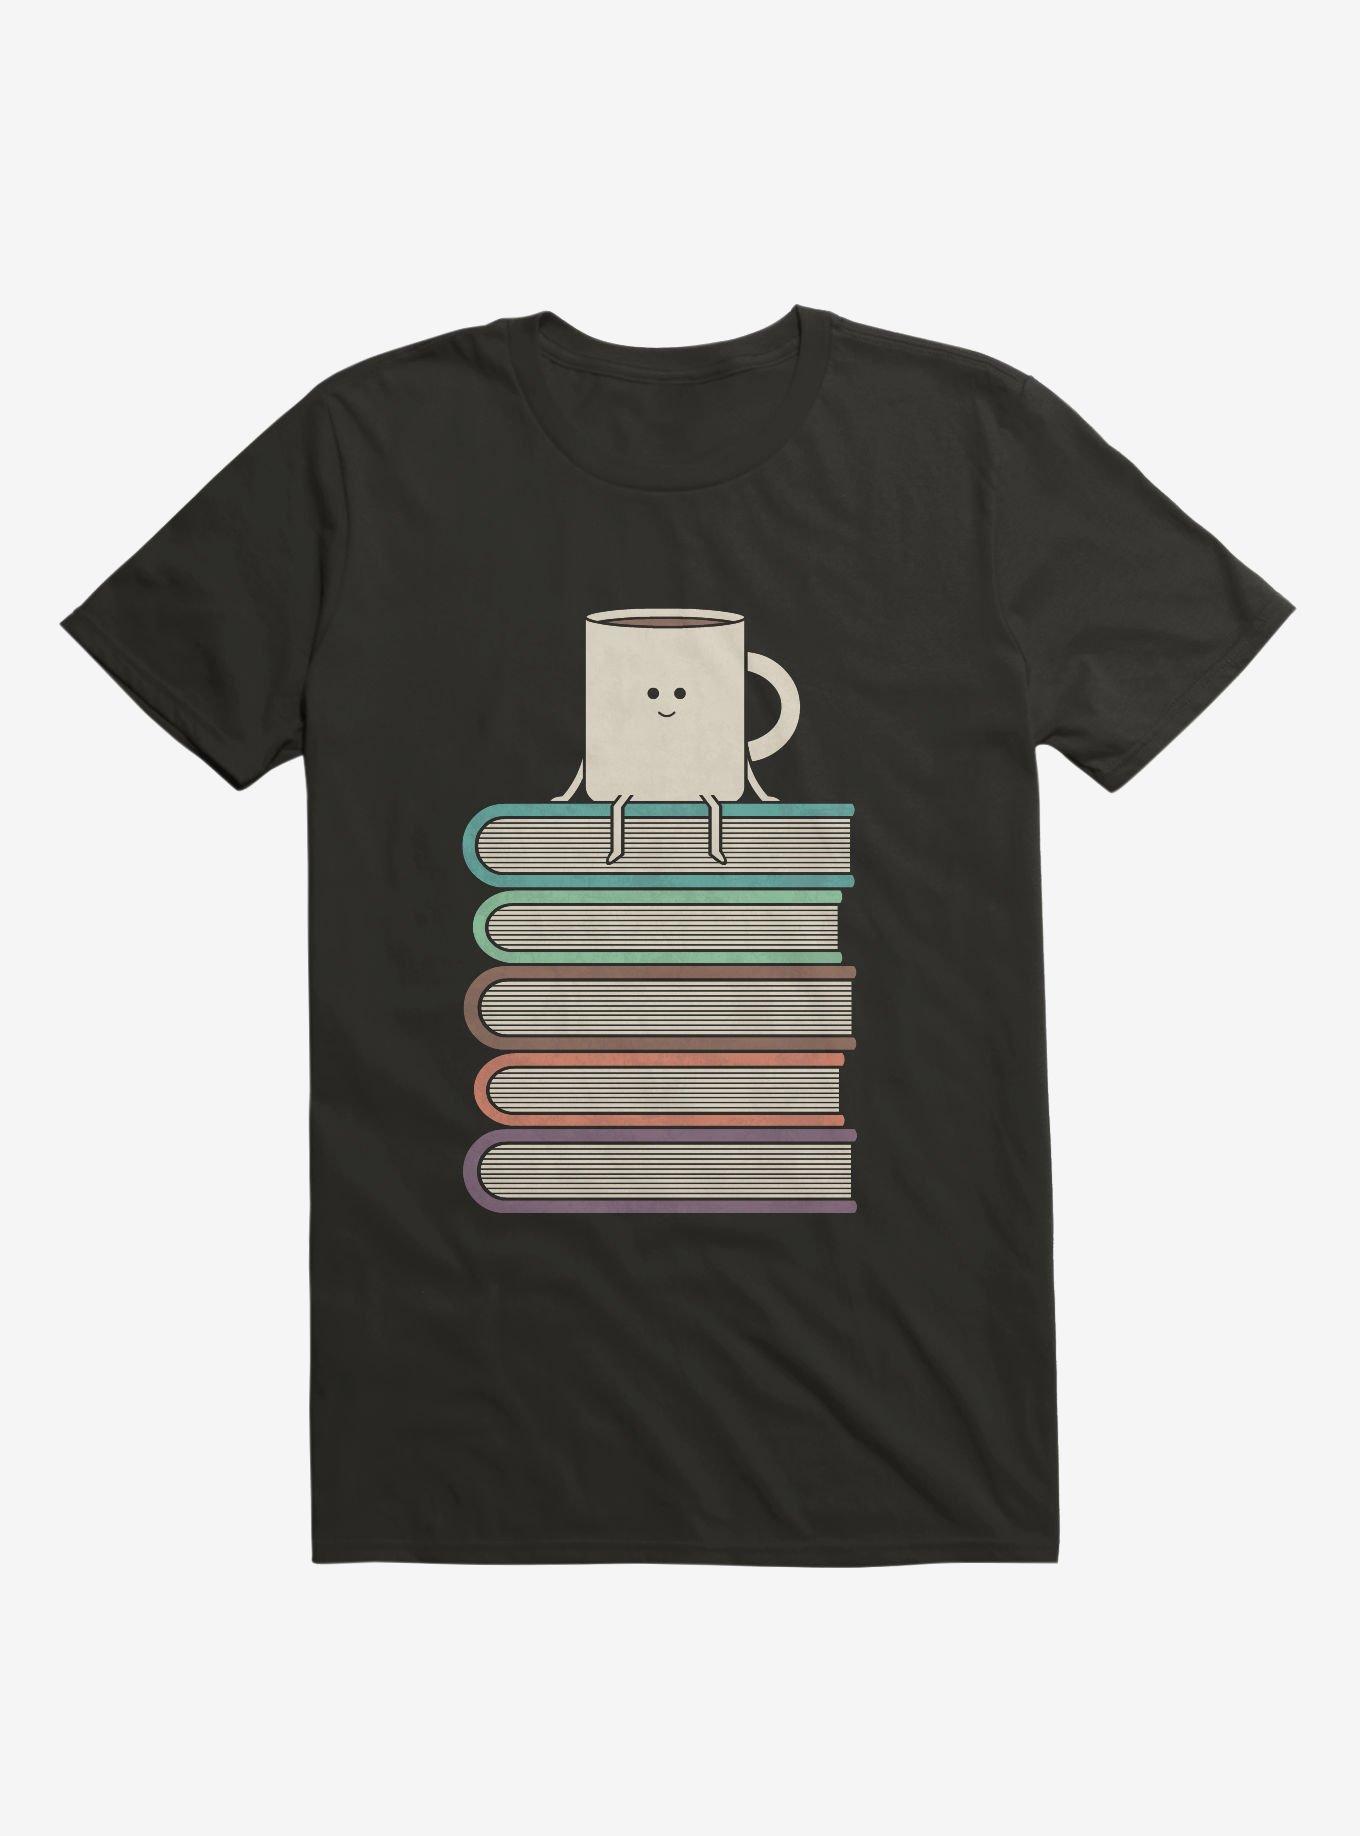 Top Of The World Cup On Books Black T-Shirt, BLACK, hi-res